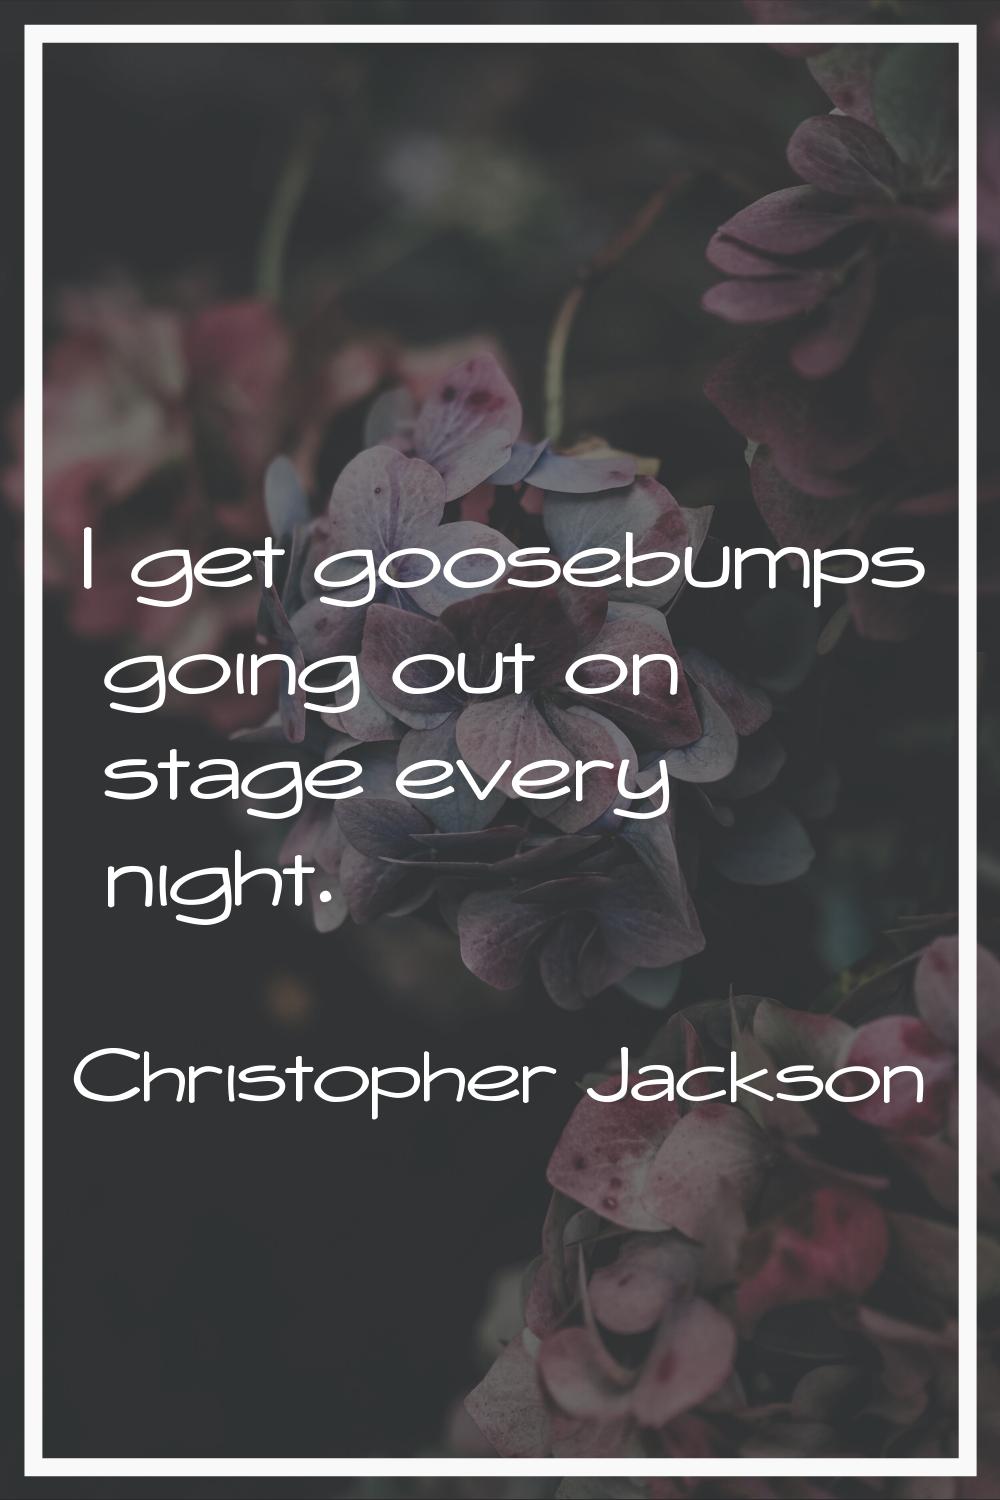 I get goosebumps going out on stage every night.